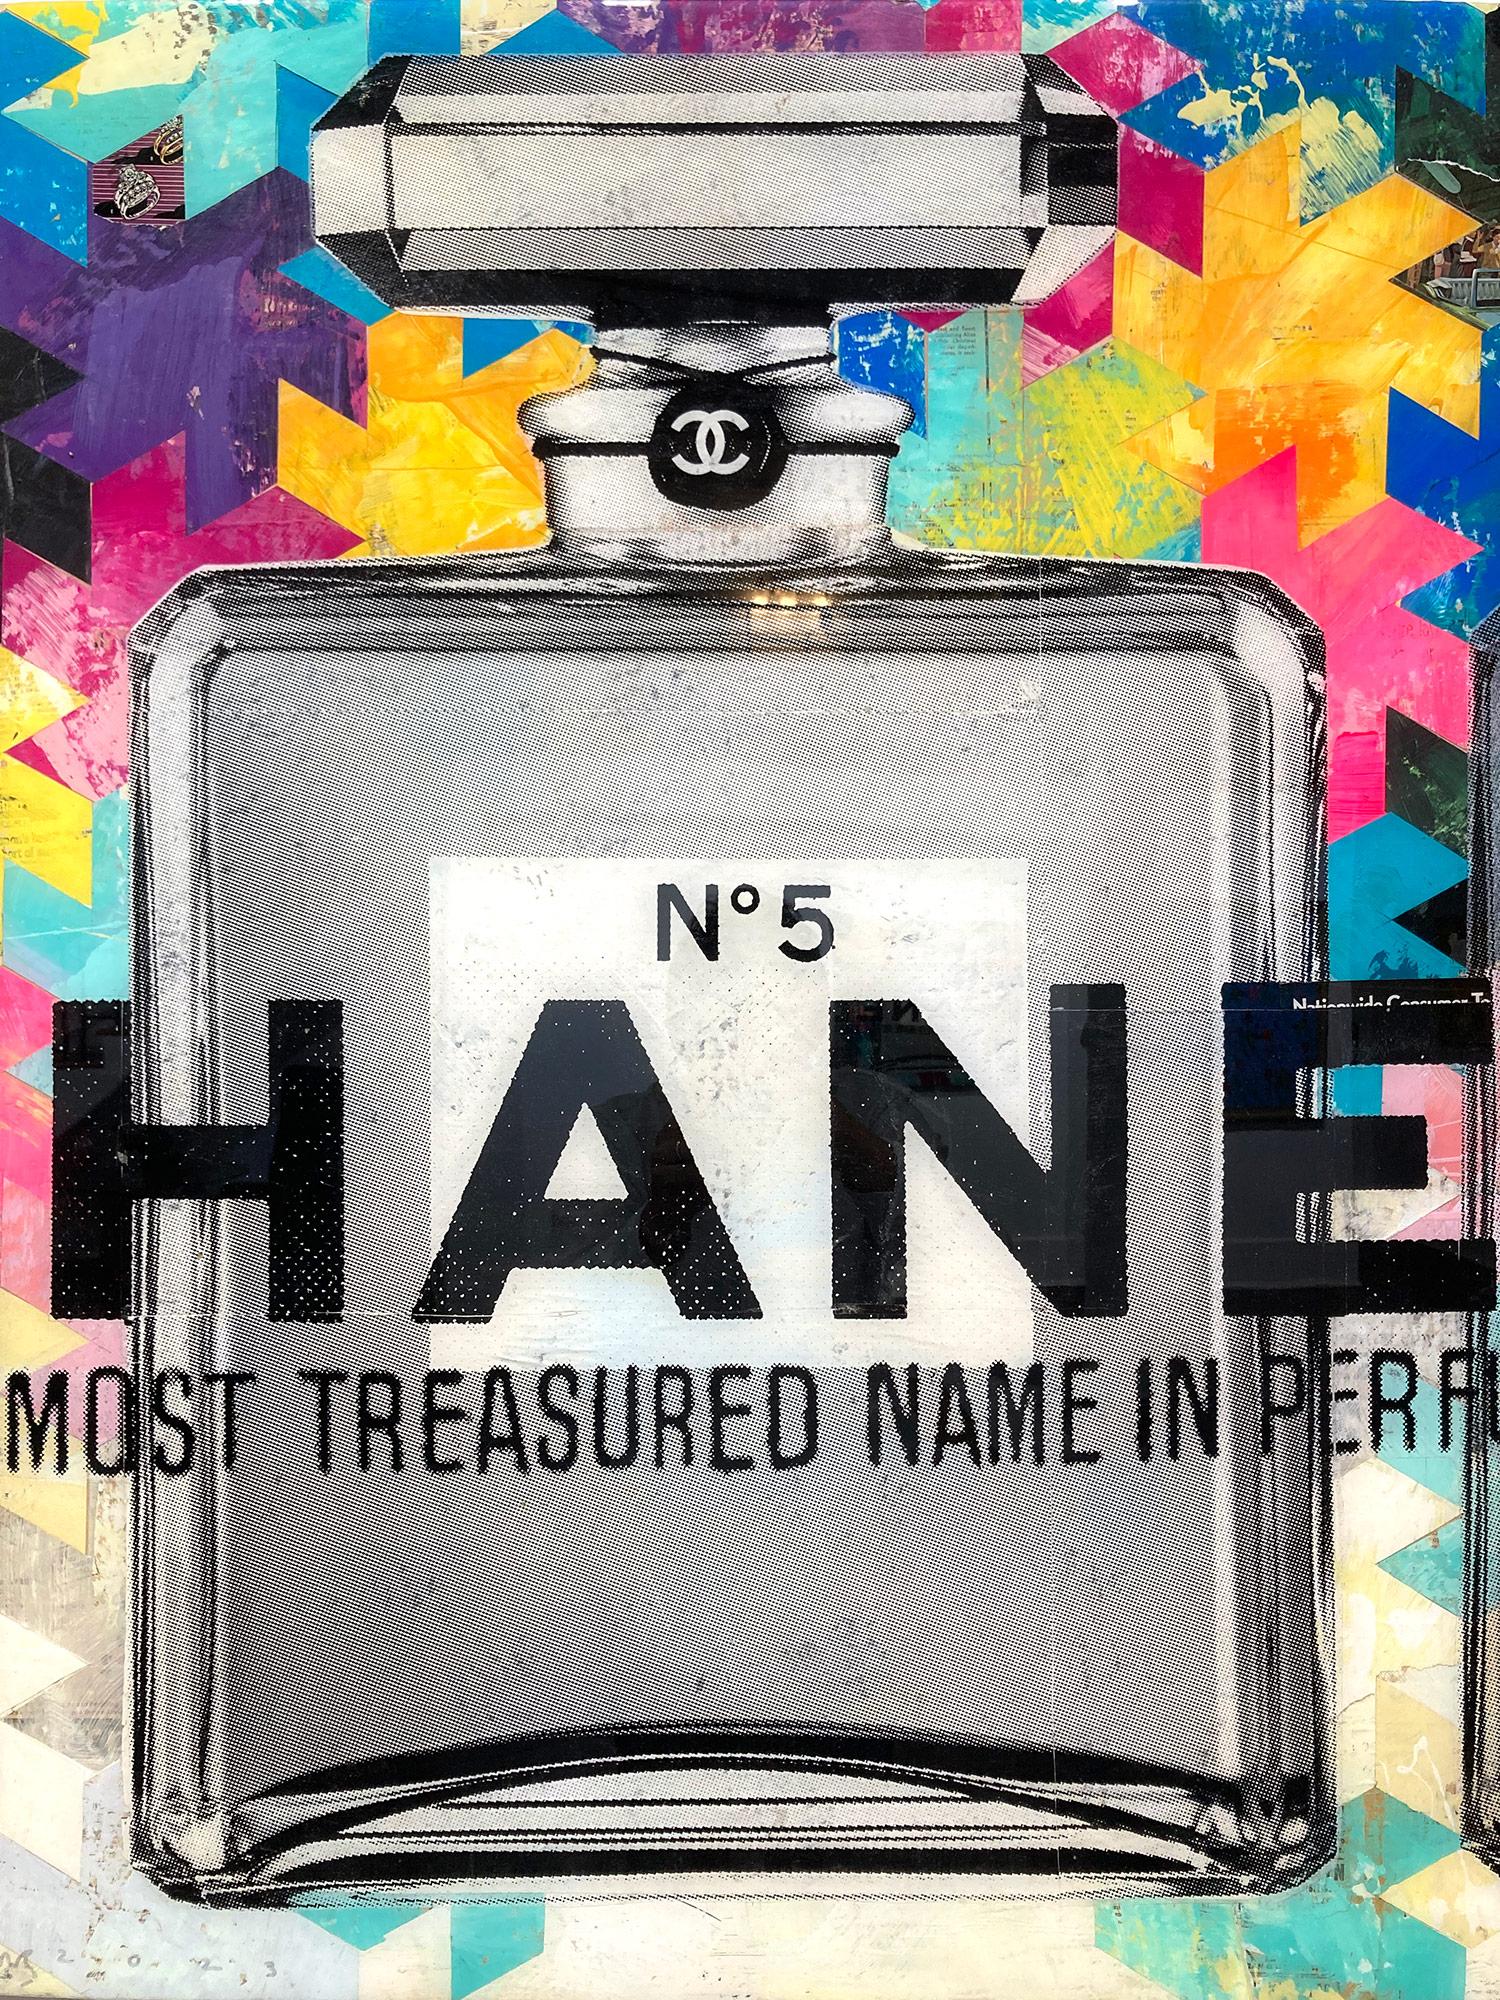 This piece depicts the famous CHANEL N°5 Perfume Bottle. Celebrating this iconic brand from the Golden Era with expressive and bold colors by capturing these moments in history, his paintings serve as vehicles for bringing the nostalgia of this